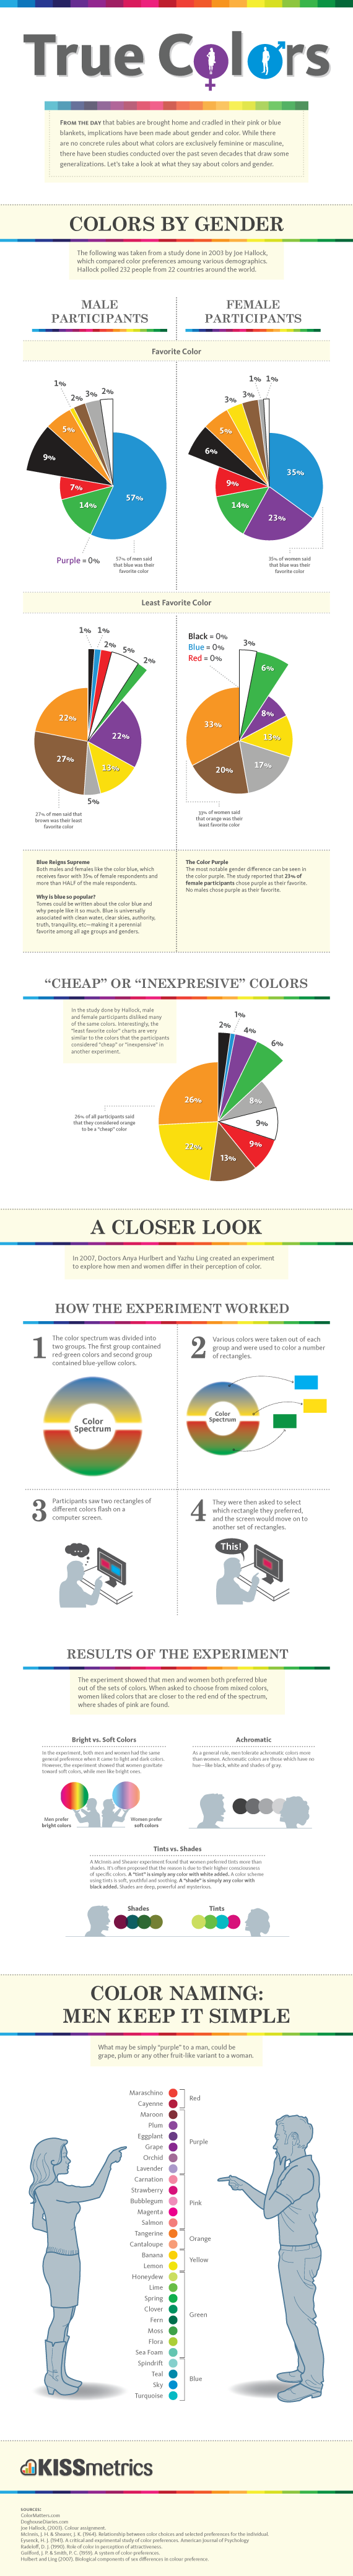 True Colors Infographic   Breakdown of Color Preferences by Gender